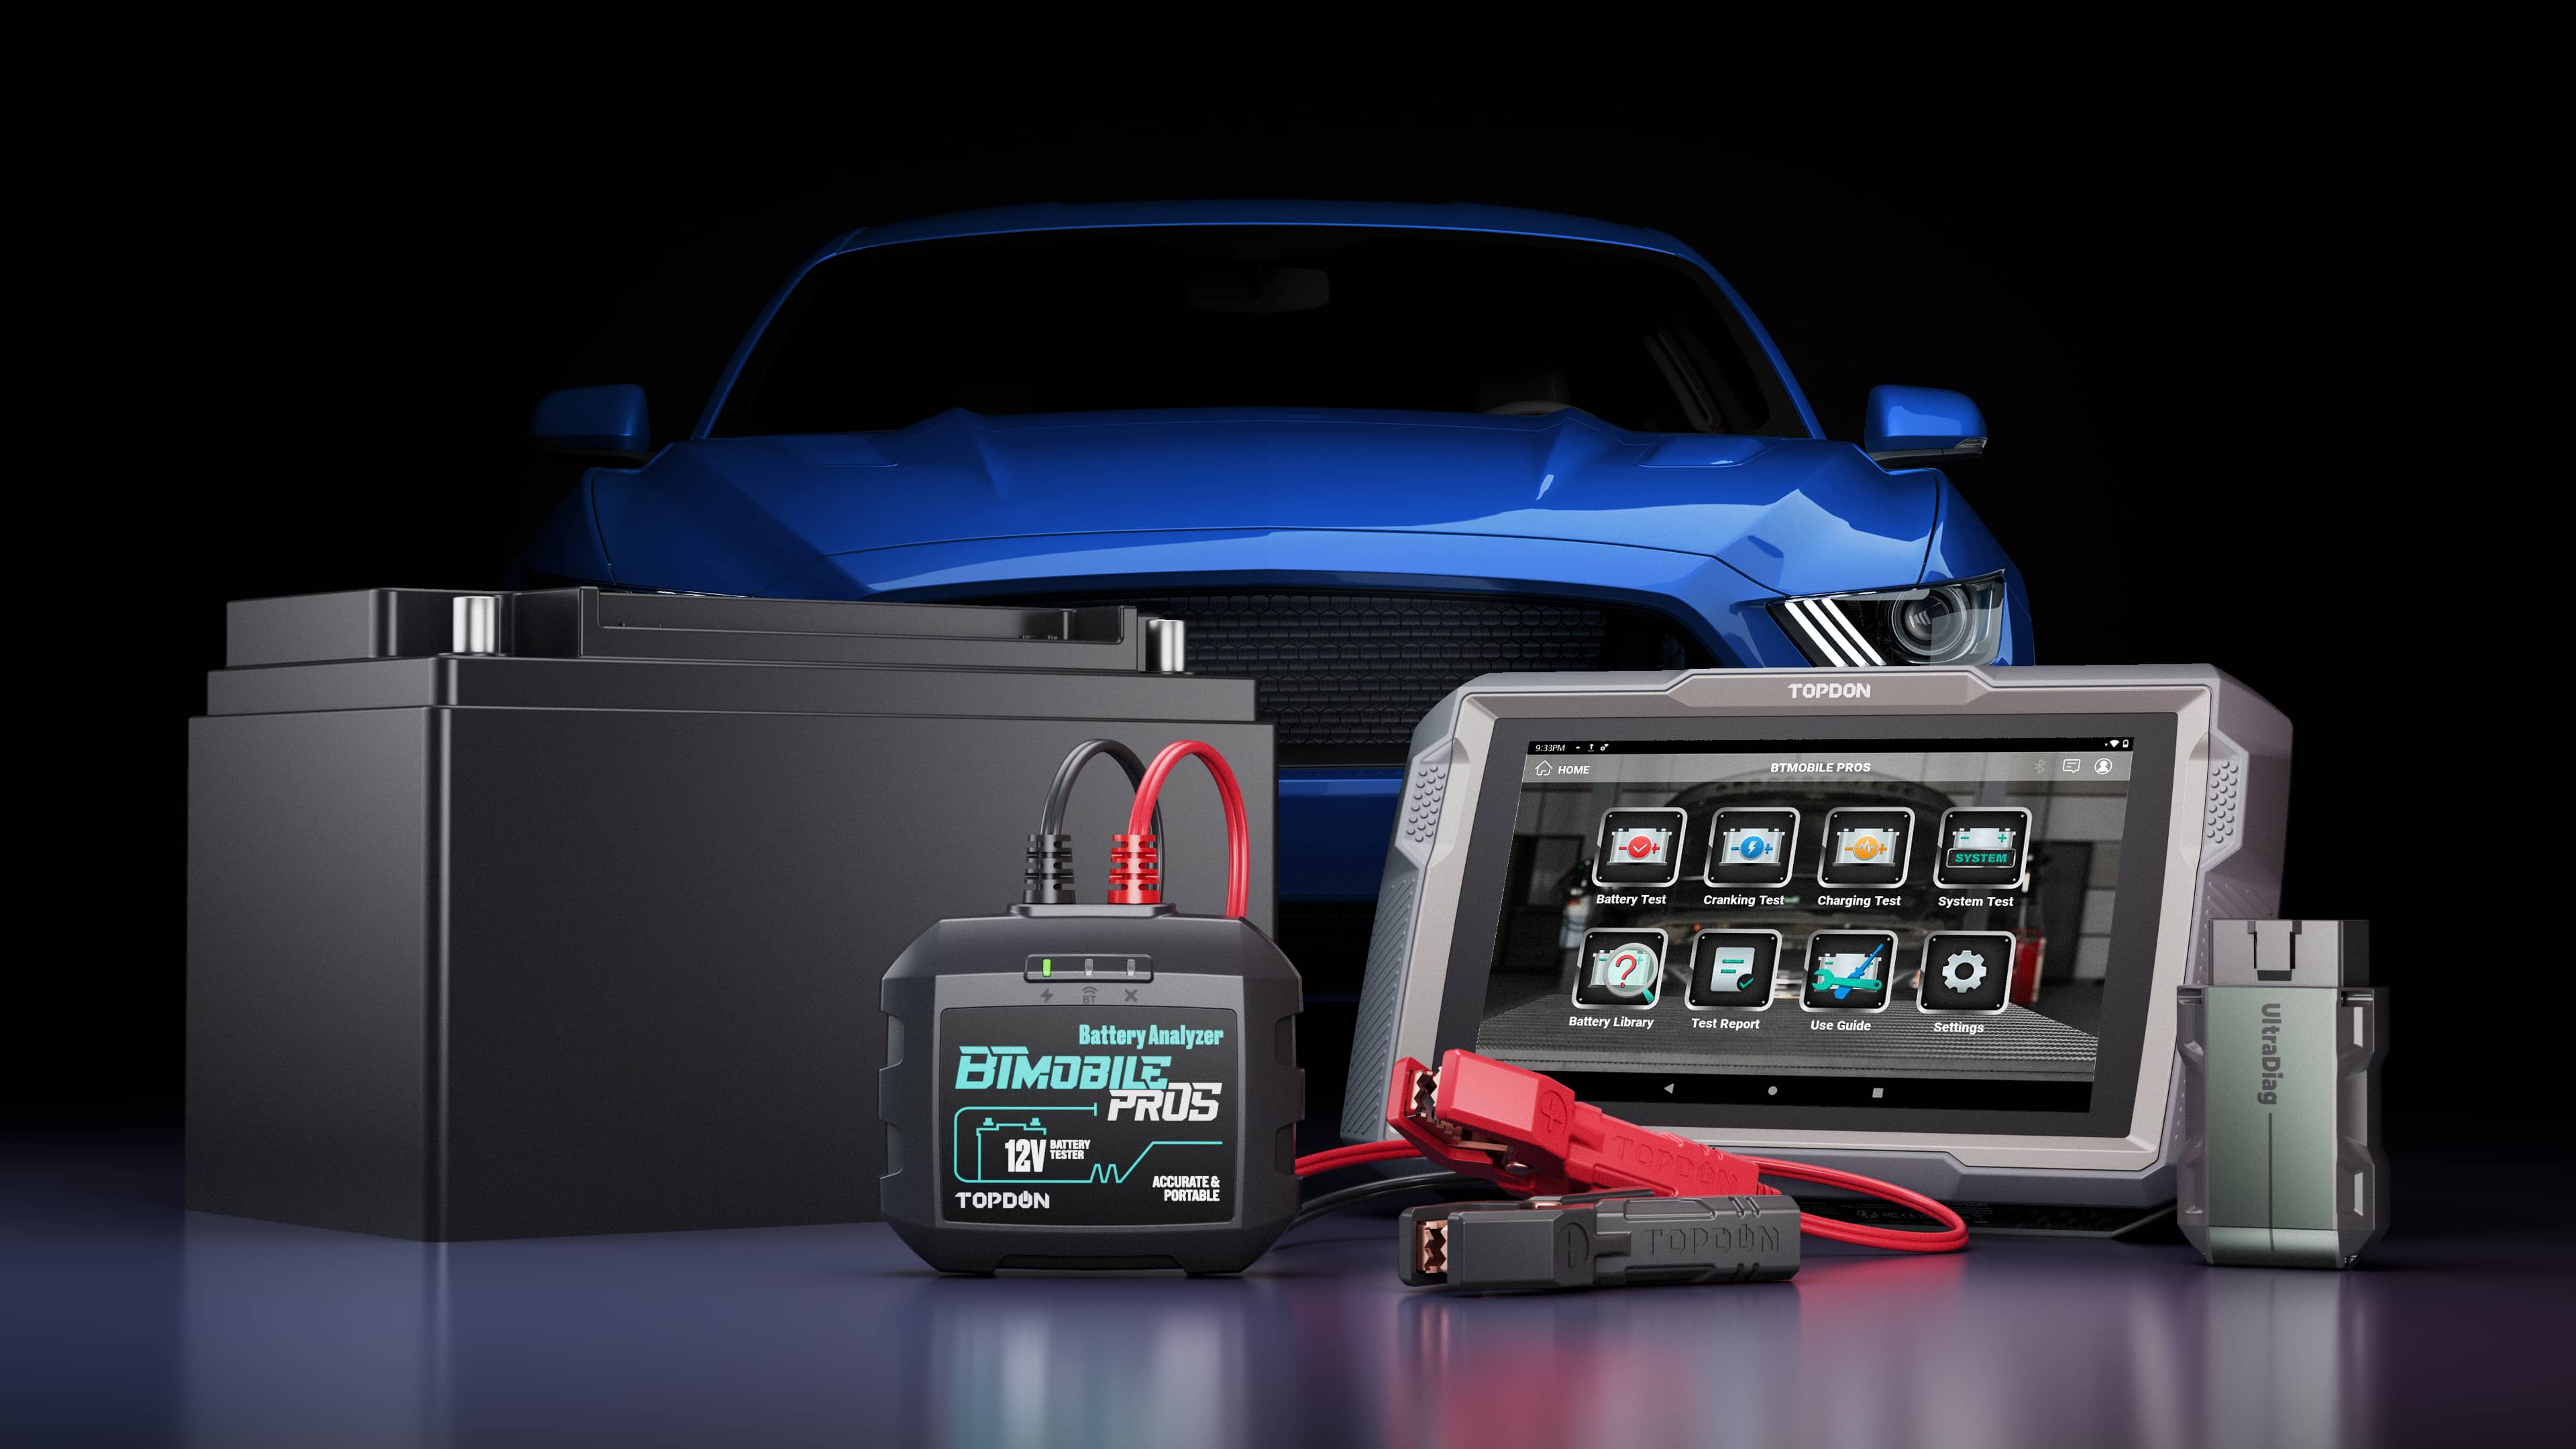 Users can pair the UltraDiag with TOPDON’s latest battery analyzer, the BTMobile Pros.